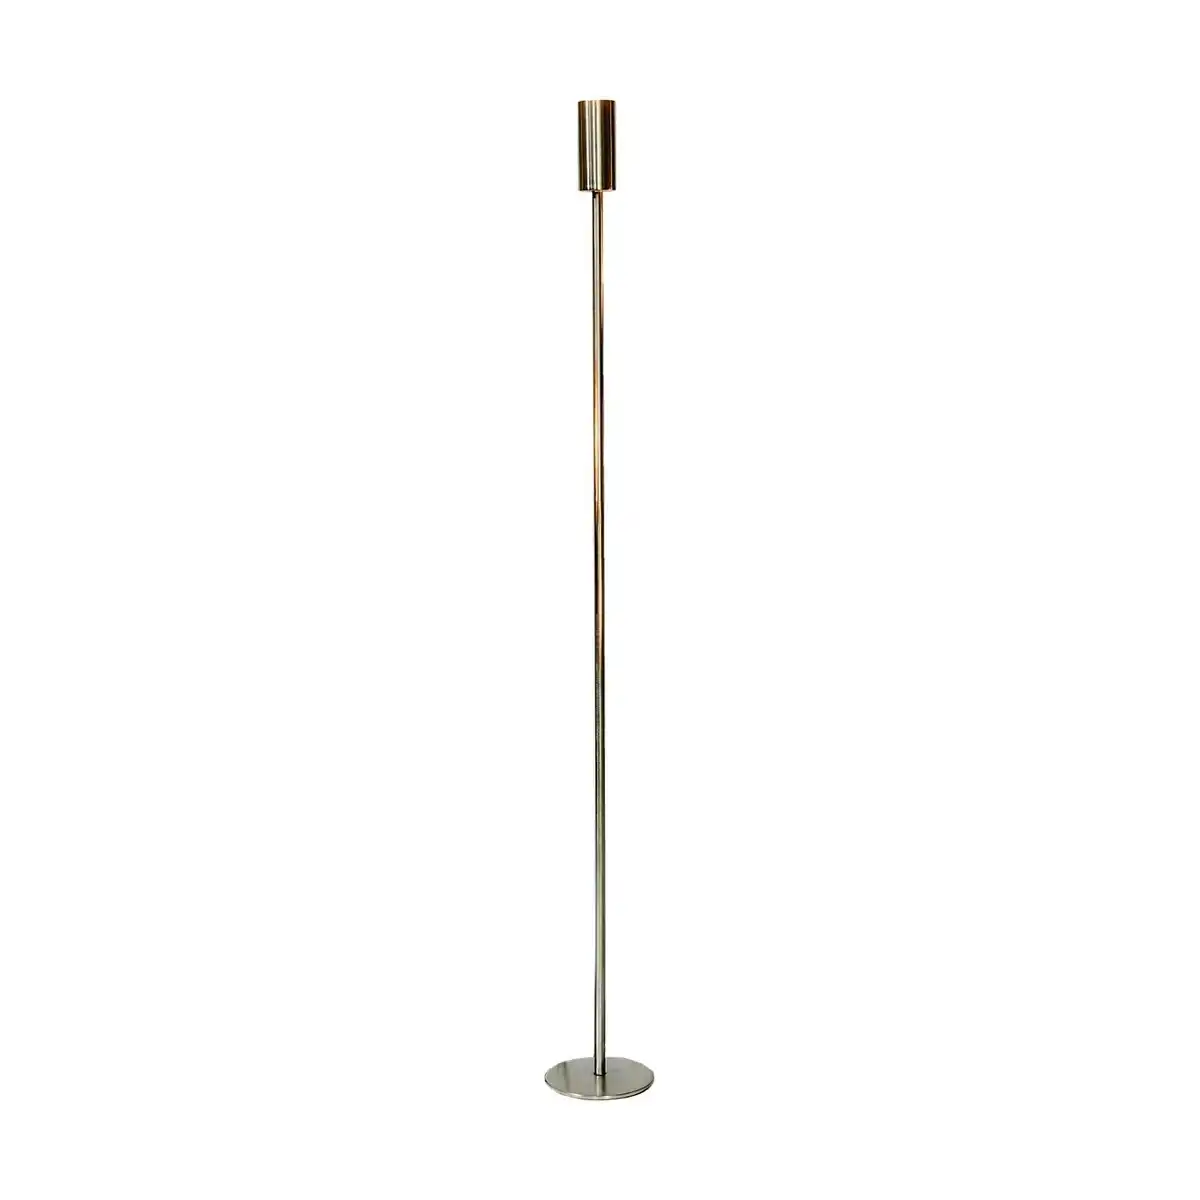 SSH Collection Ava 110cm Tall Single Candle Stand - Nickel